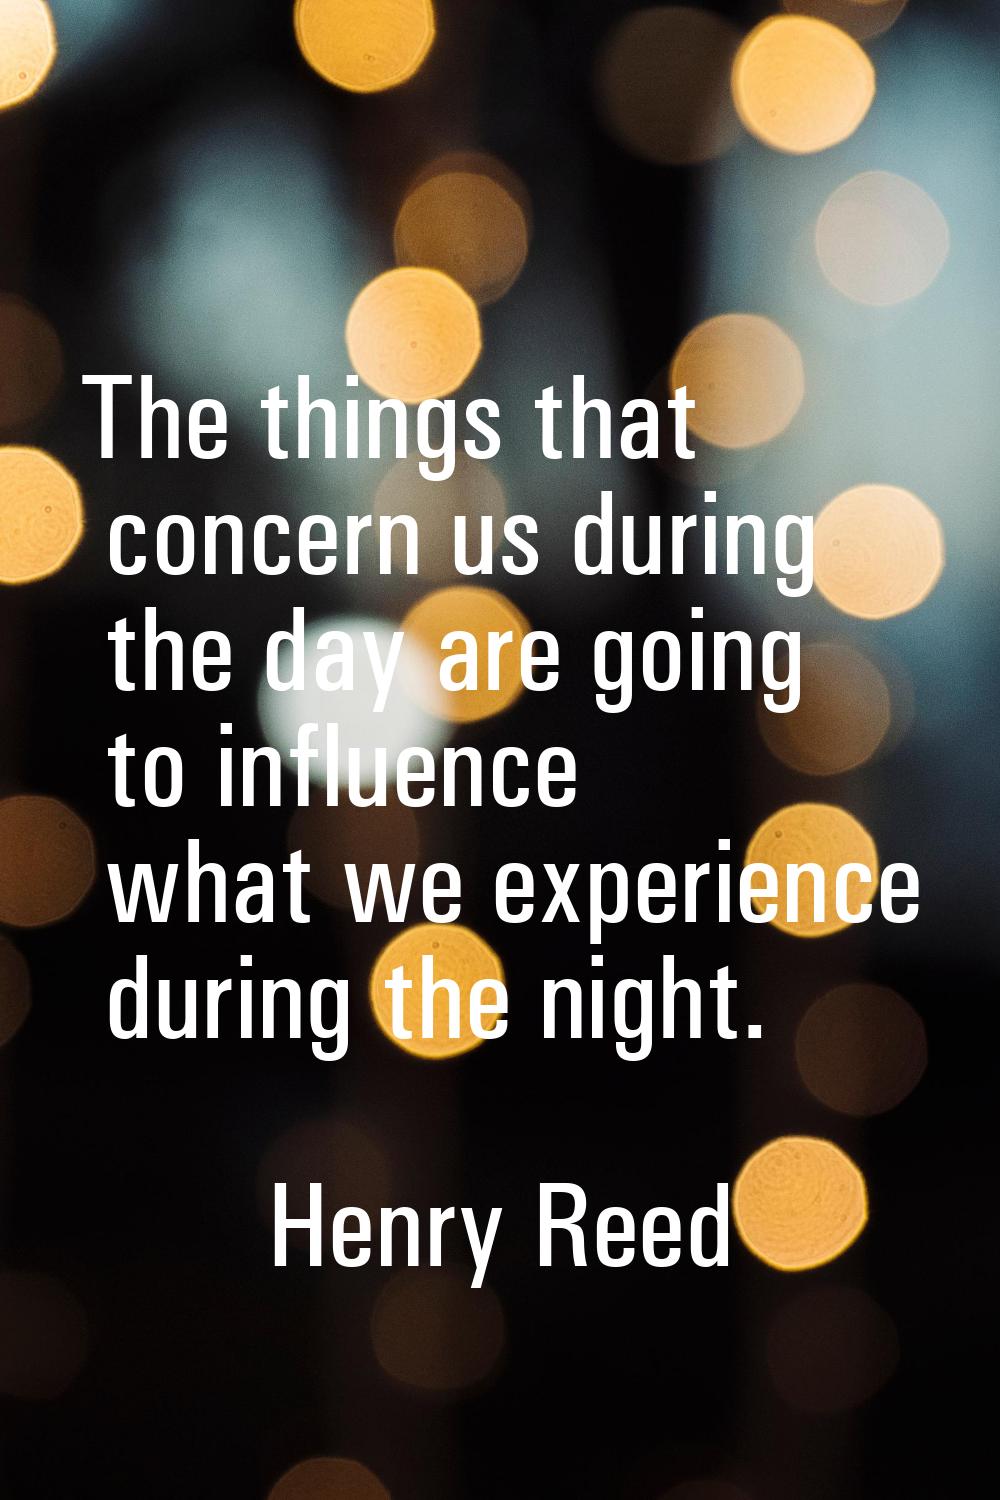 The things that concern us during the day are going to influence what we experience during the nigh